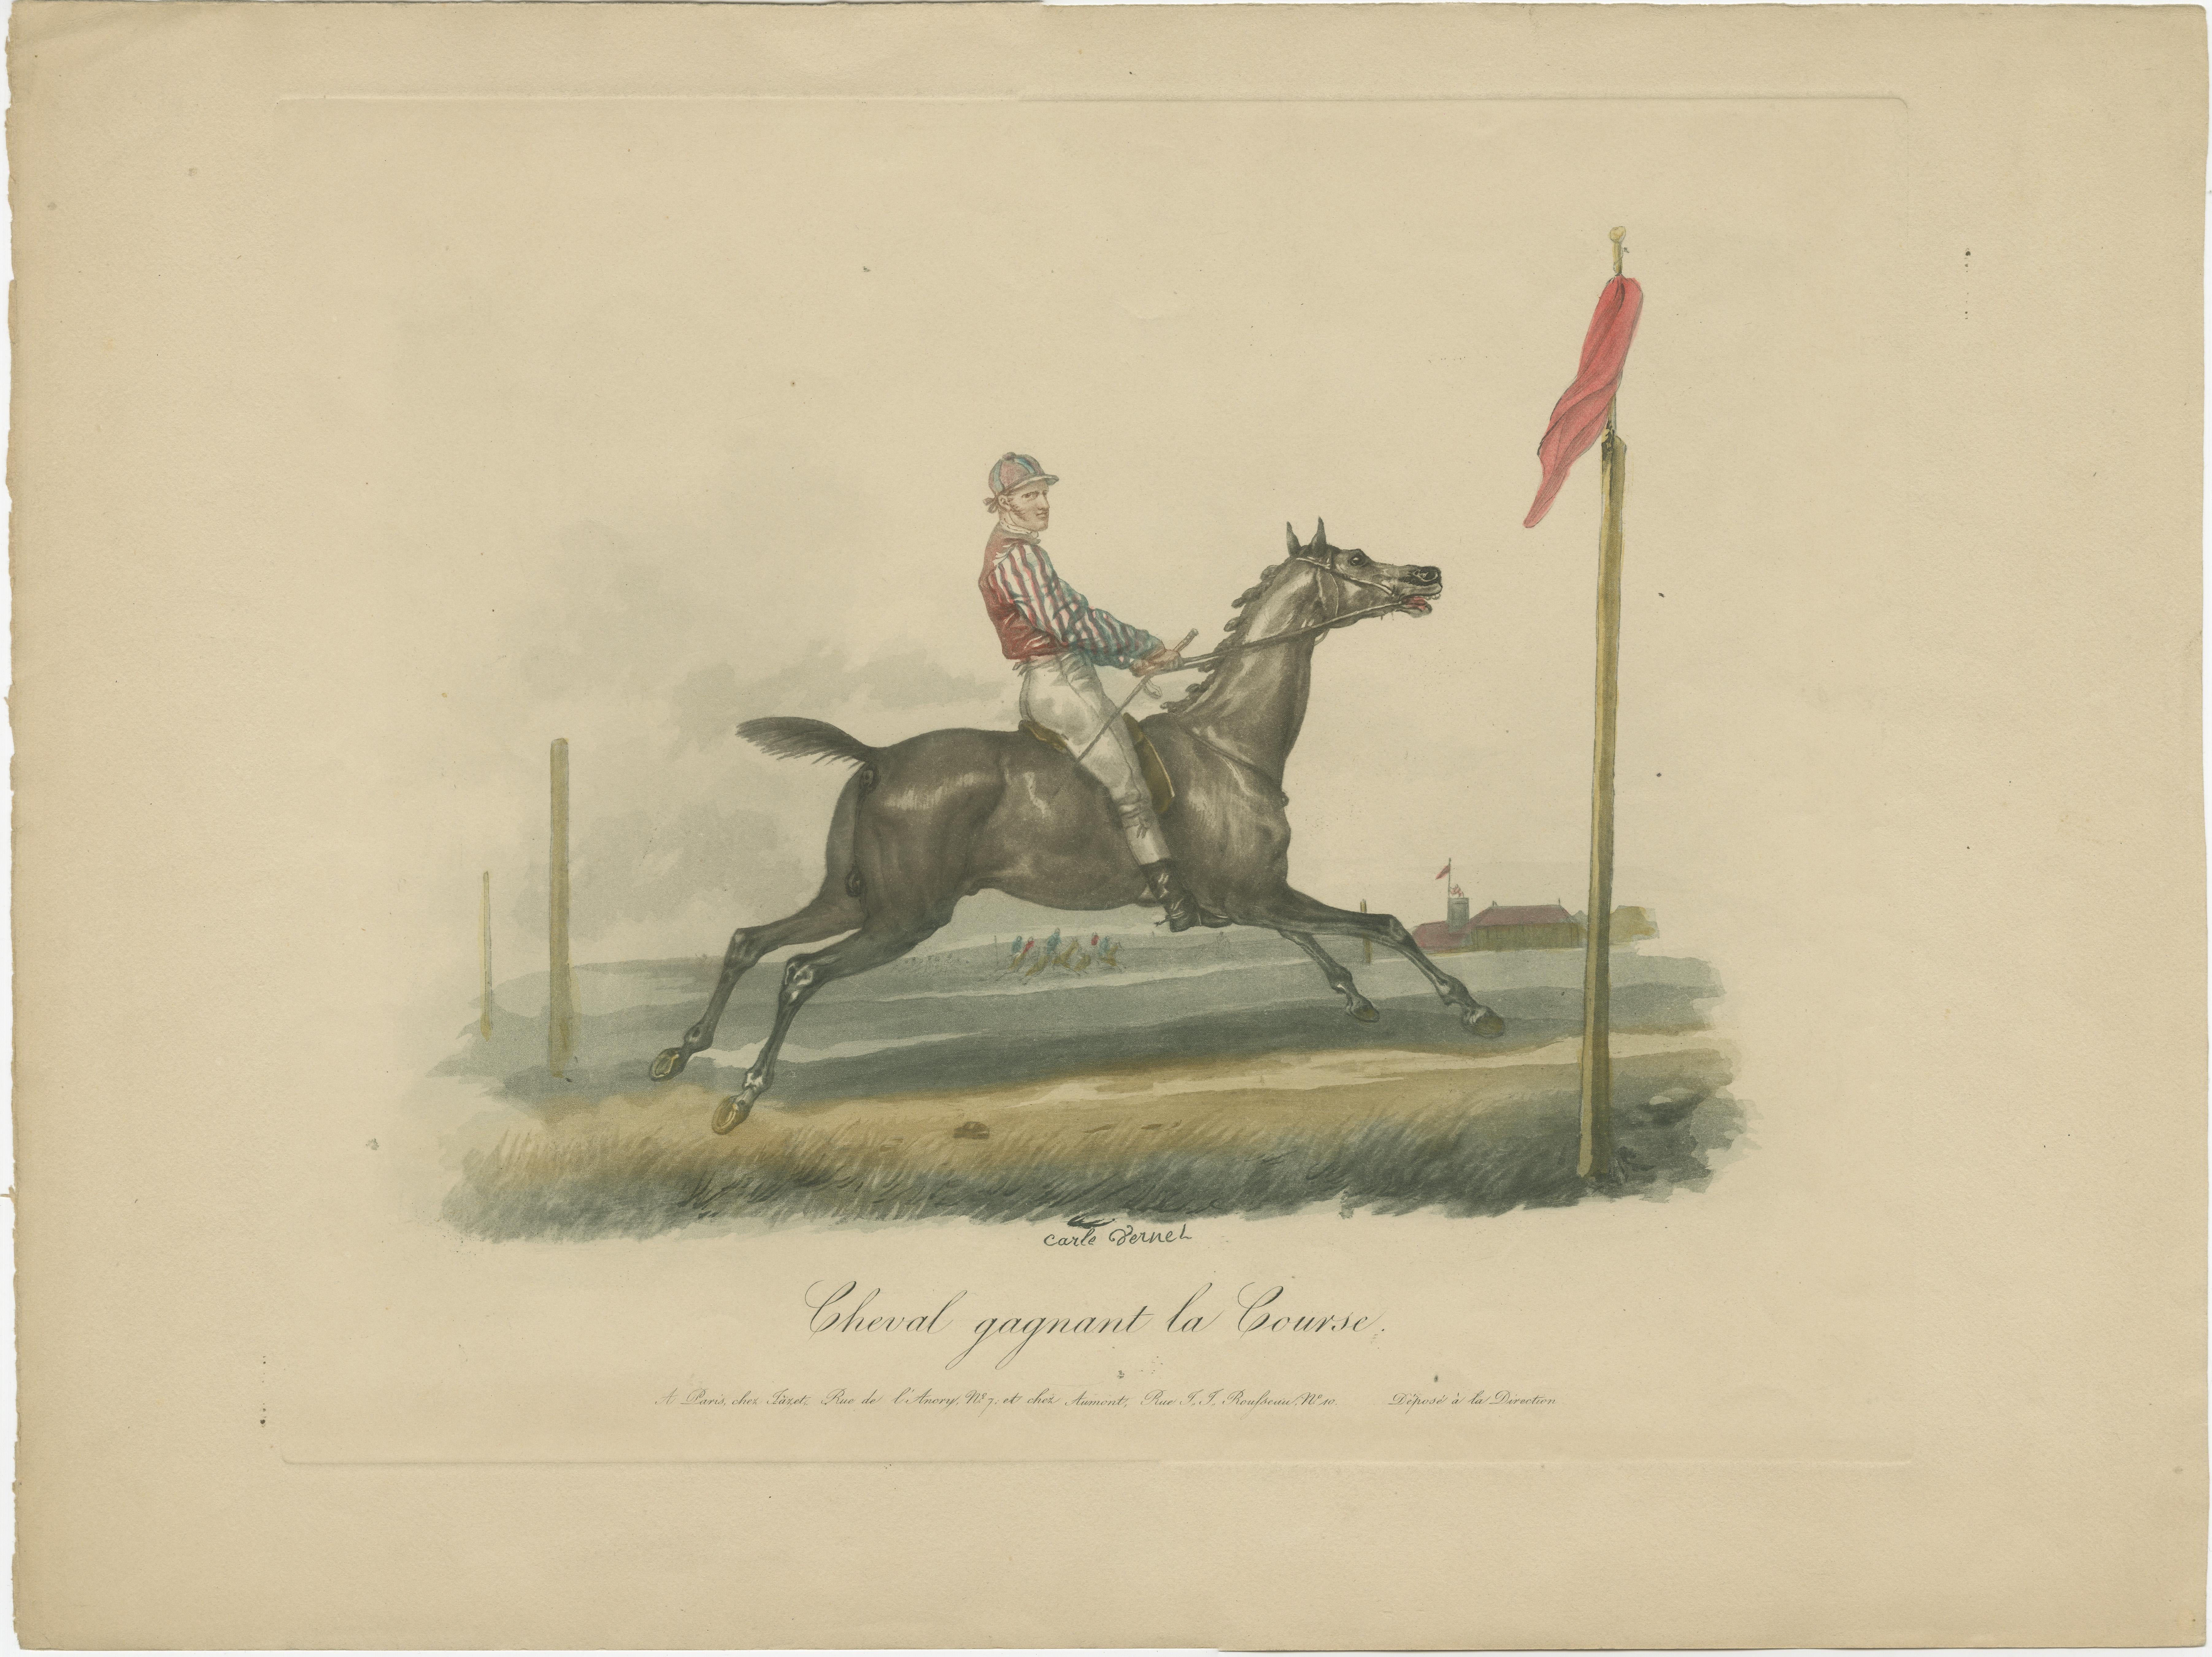 19th Century Set of 4 Antique Horse Racing Prints with Jockeys and a Dog